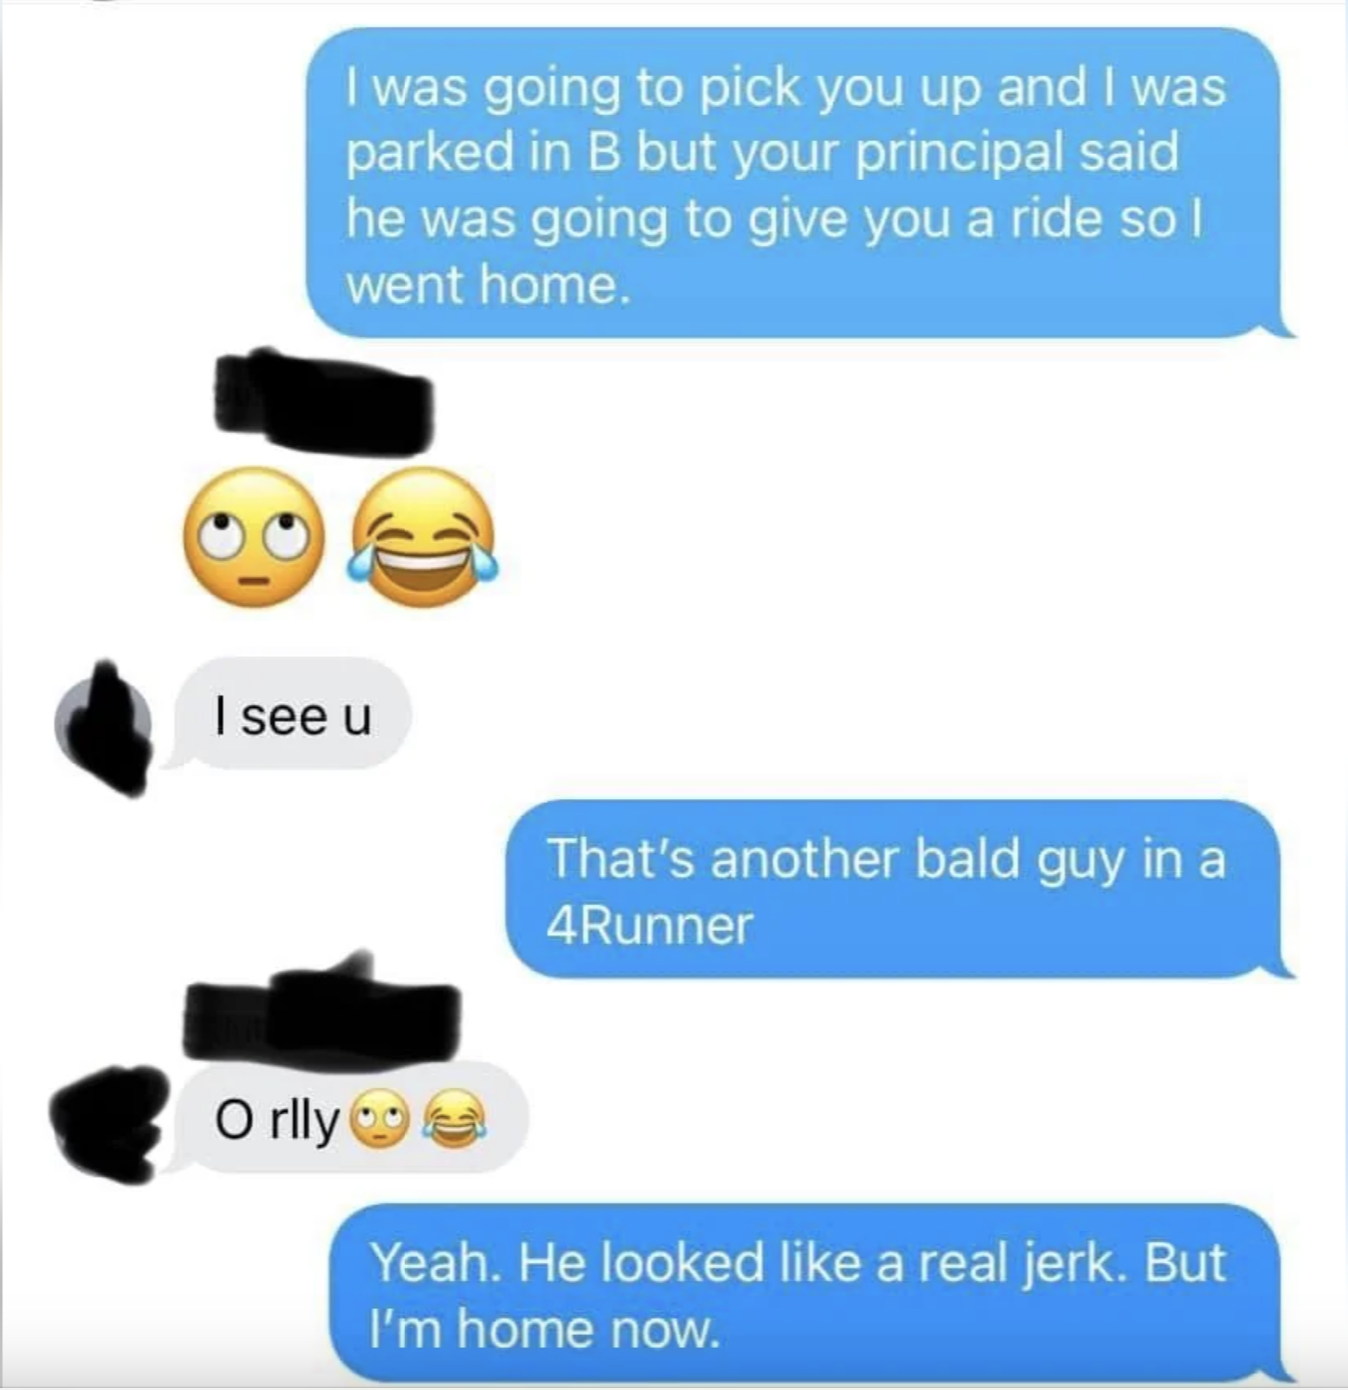 Screenshot of a text exchange where one person mistakes another for someone else at a pickup location, leading to a humorous misunderstanding